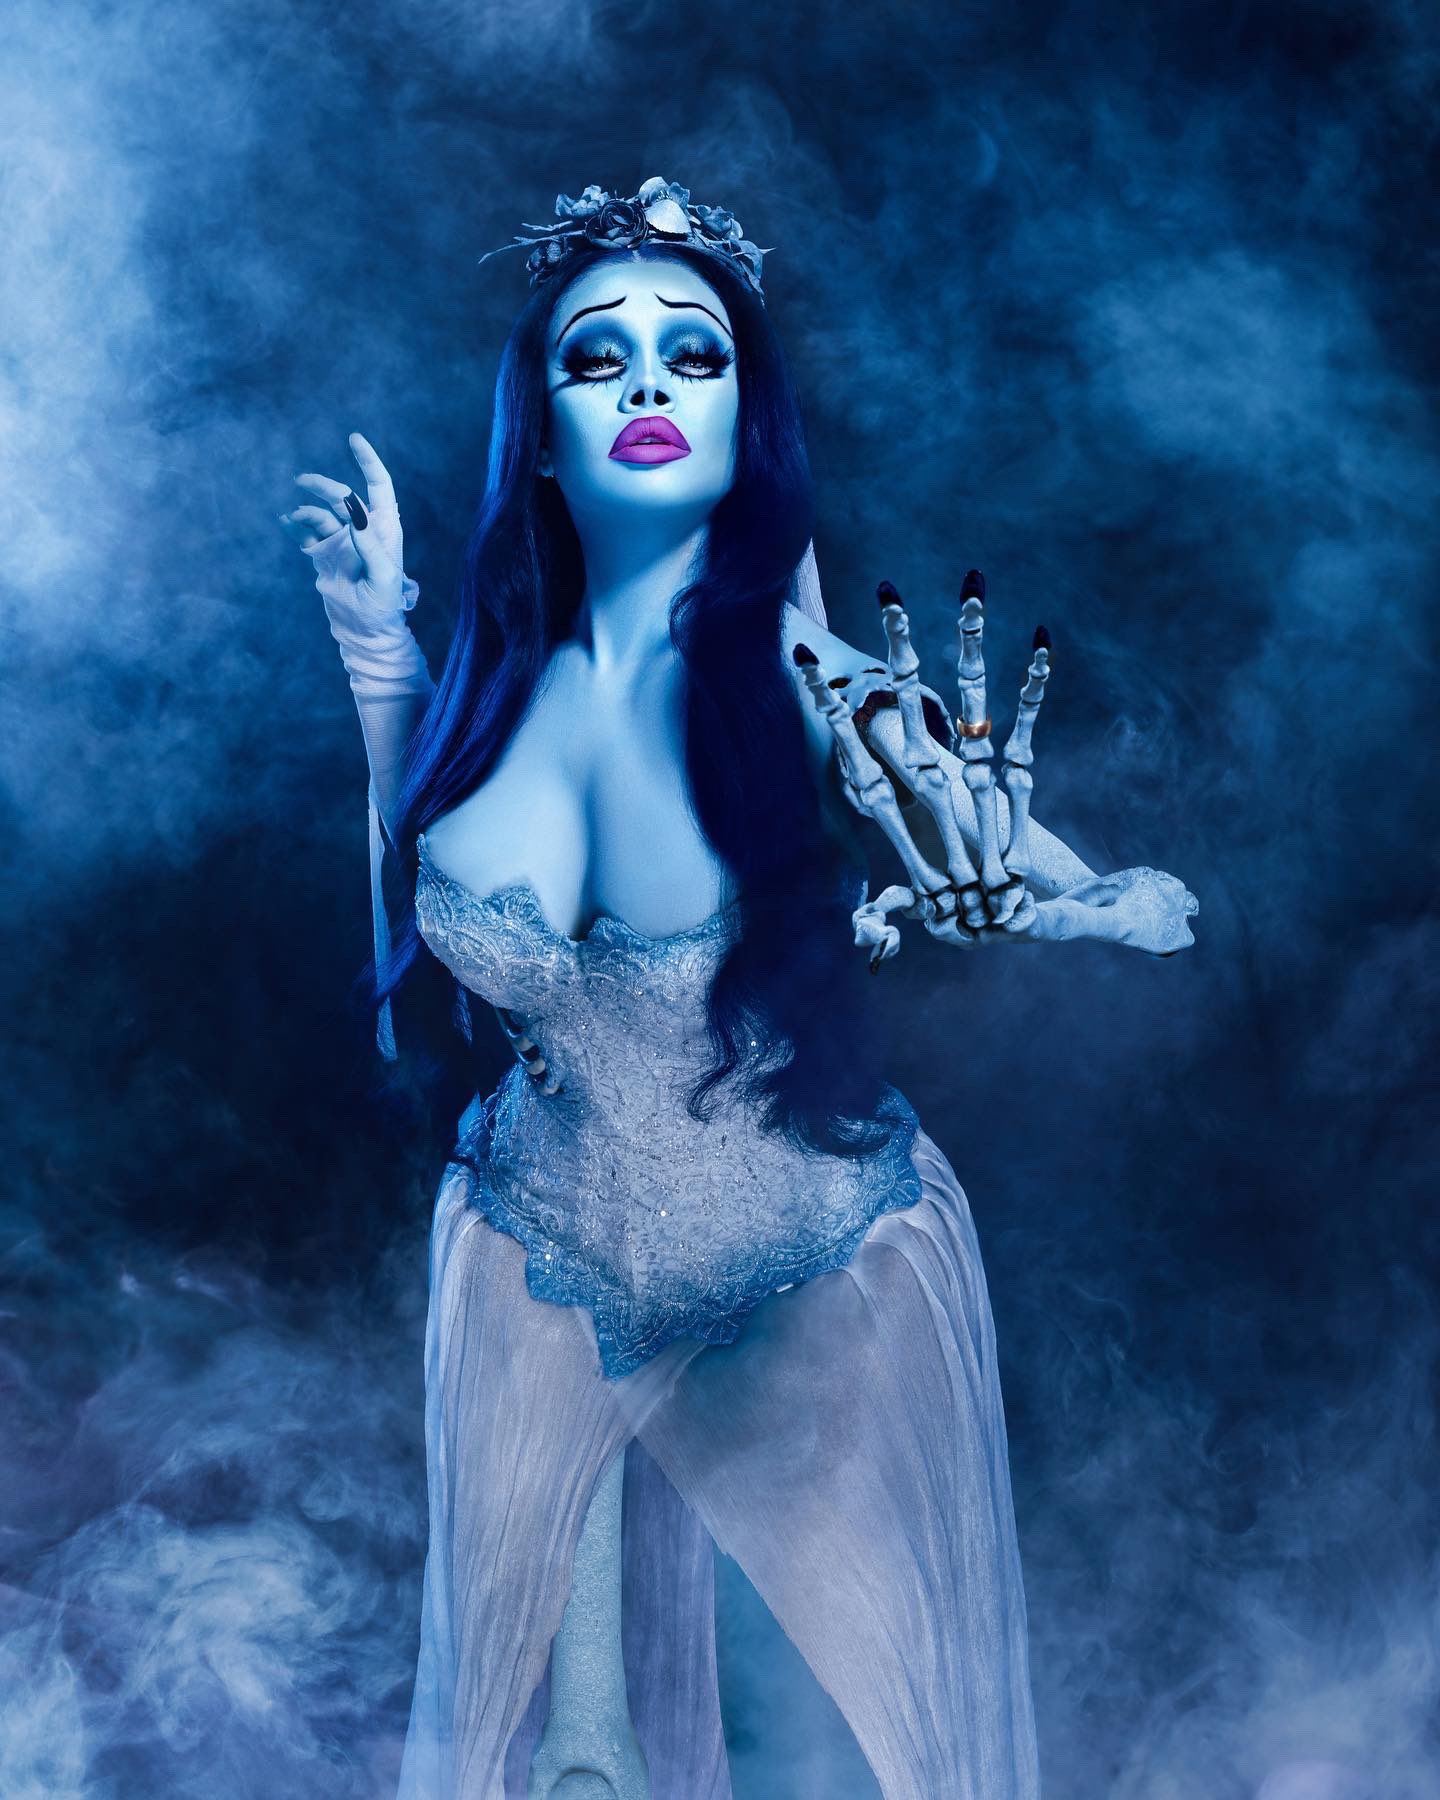 Best Halloween costumes by celebrities this year. 2022 Halloween was filled with stylish costumes and Hollywood celebrities were not left out. Stunning Halloween looks and Halloween costumes in 2022.